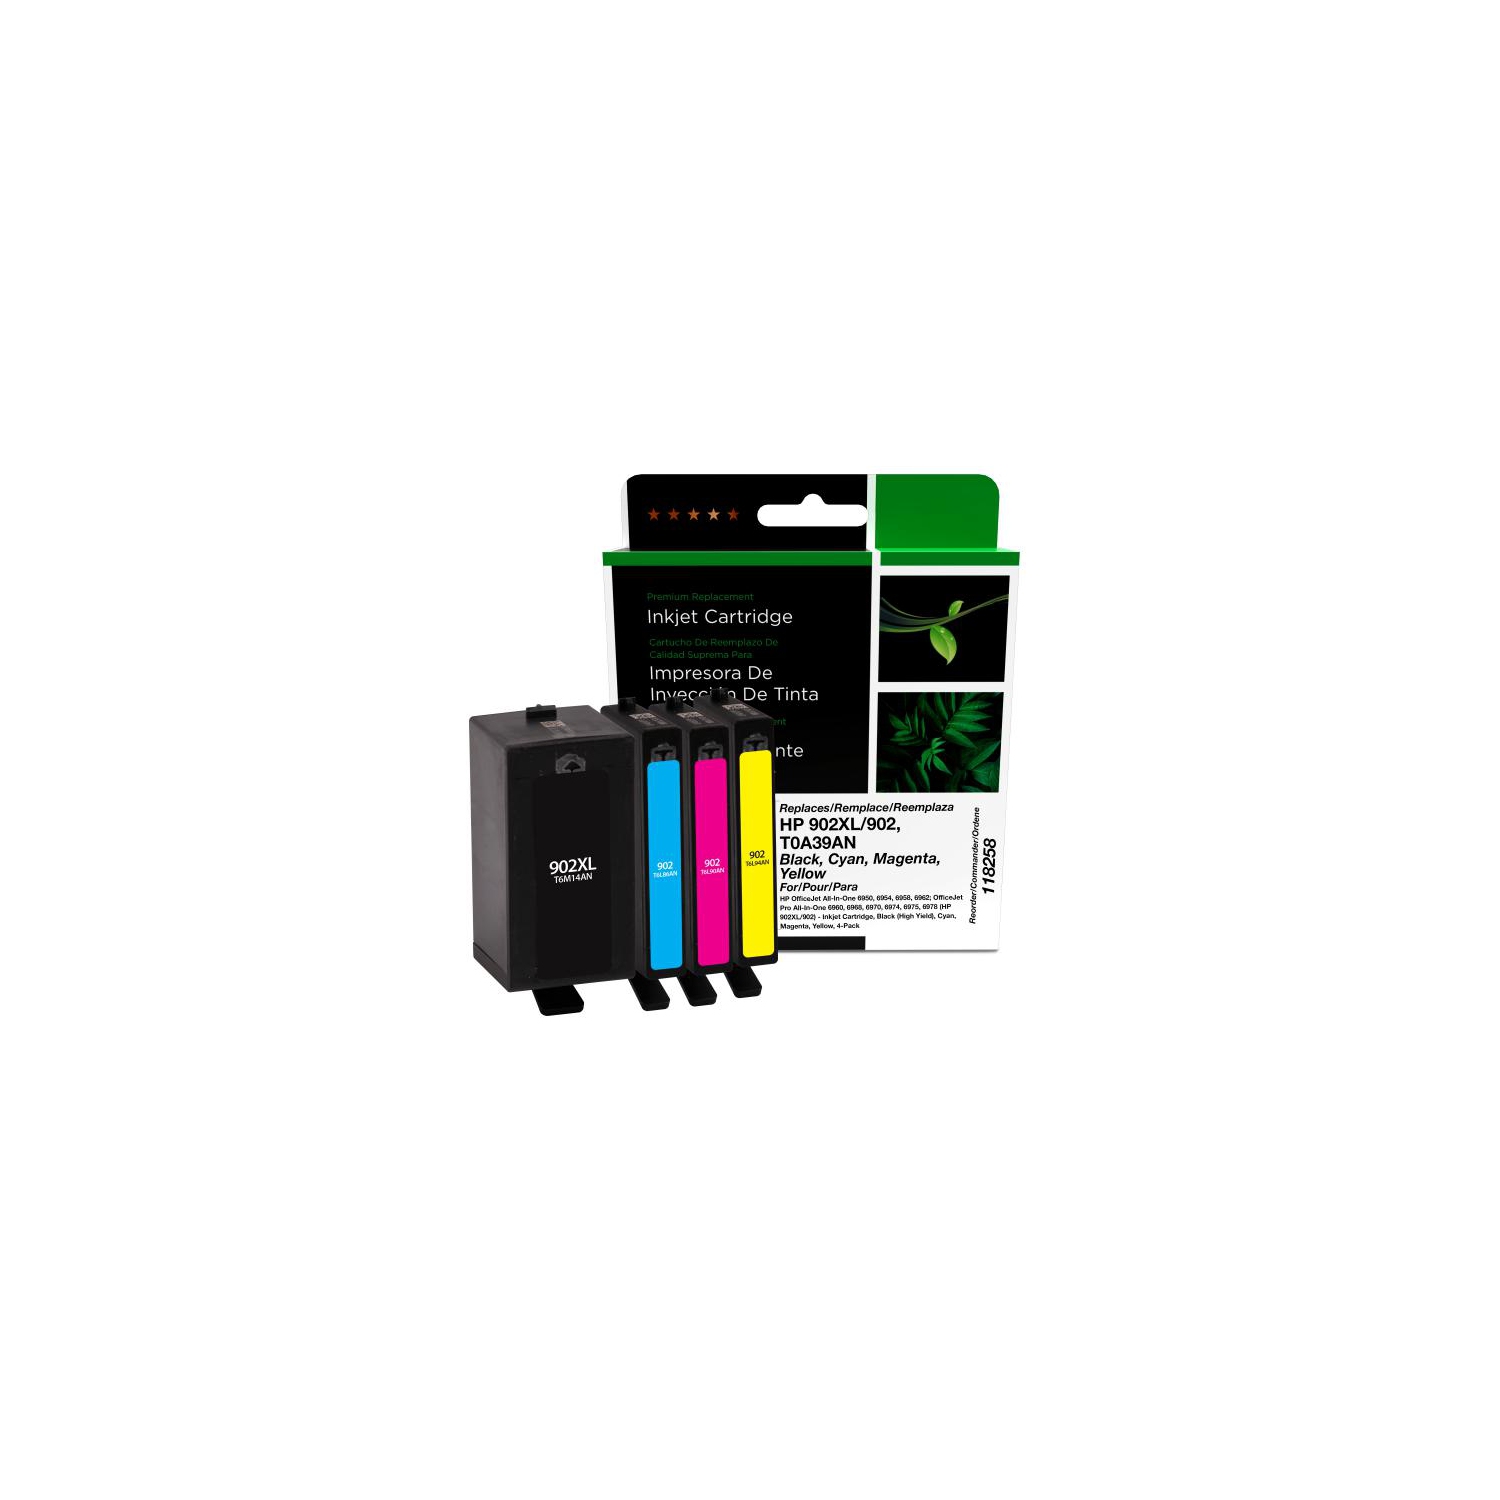 Clover Imaging Remanufactured Black High Yield, Cyan, Magenta, Yellow Ink Cartridges for HP 902XL/902 (T0A39AN) 4-Pack